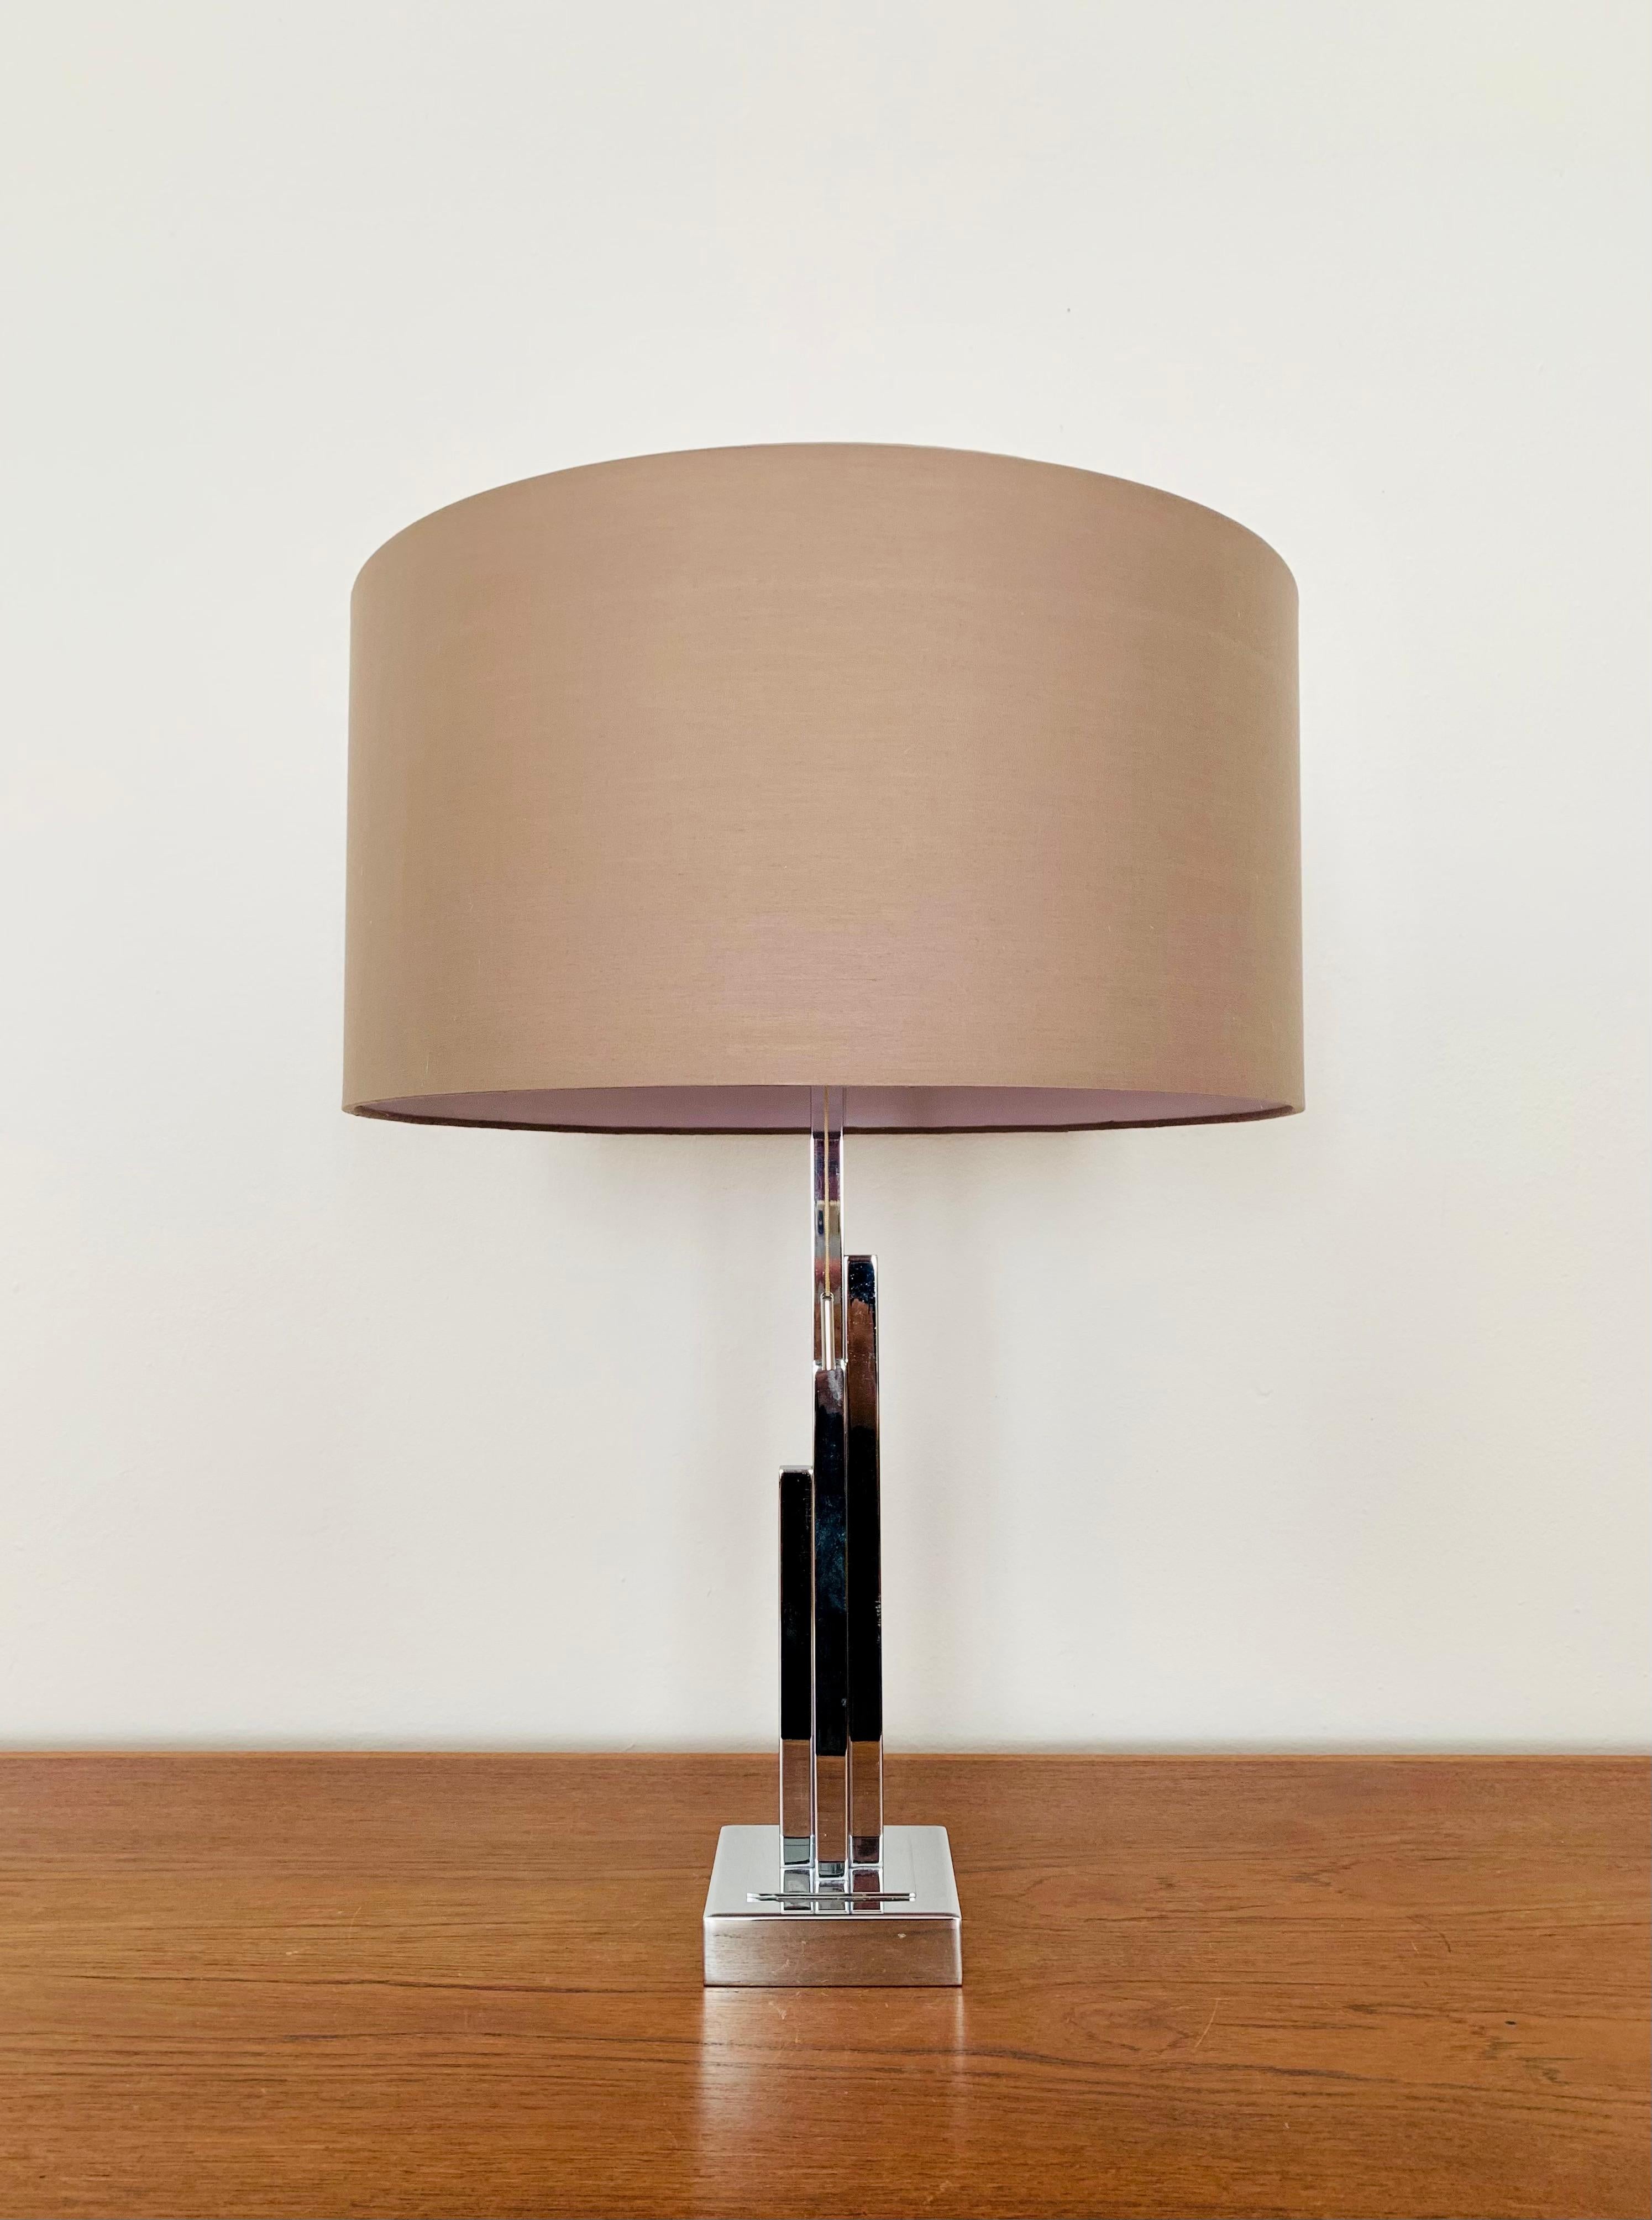 Very nice table lamp from the 1970s.
Great design and high-quality workmanship.
The lamp base has a very special design and makes the lamp a real favourite.
A warm light emerges.

The 2 sockets can be switched individually by pulling several